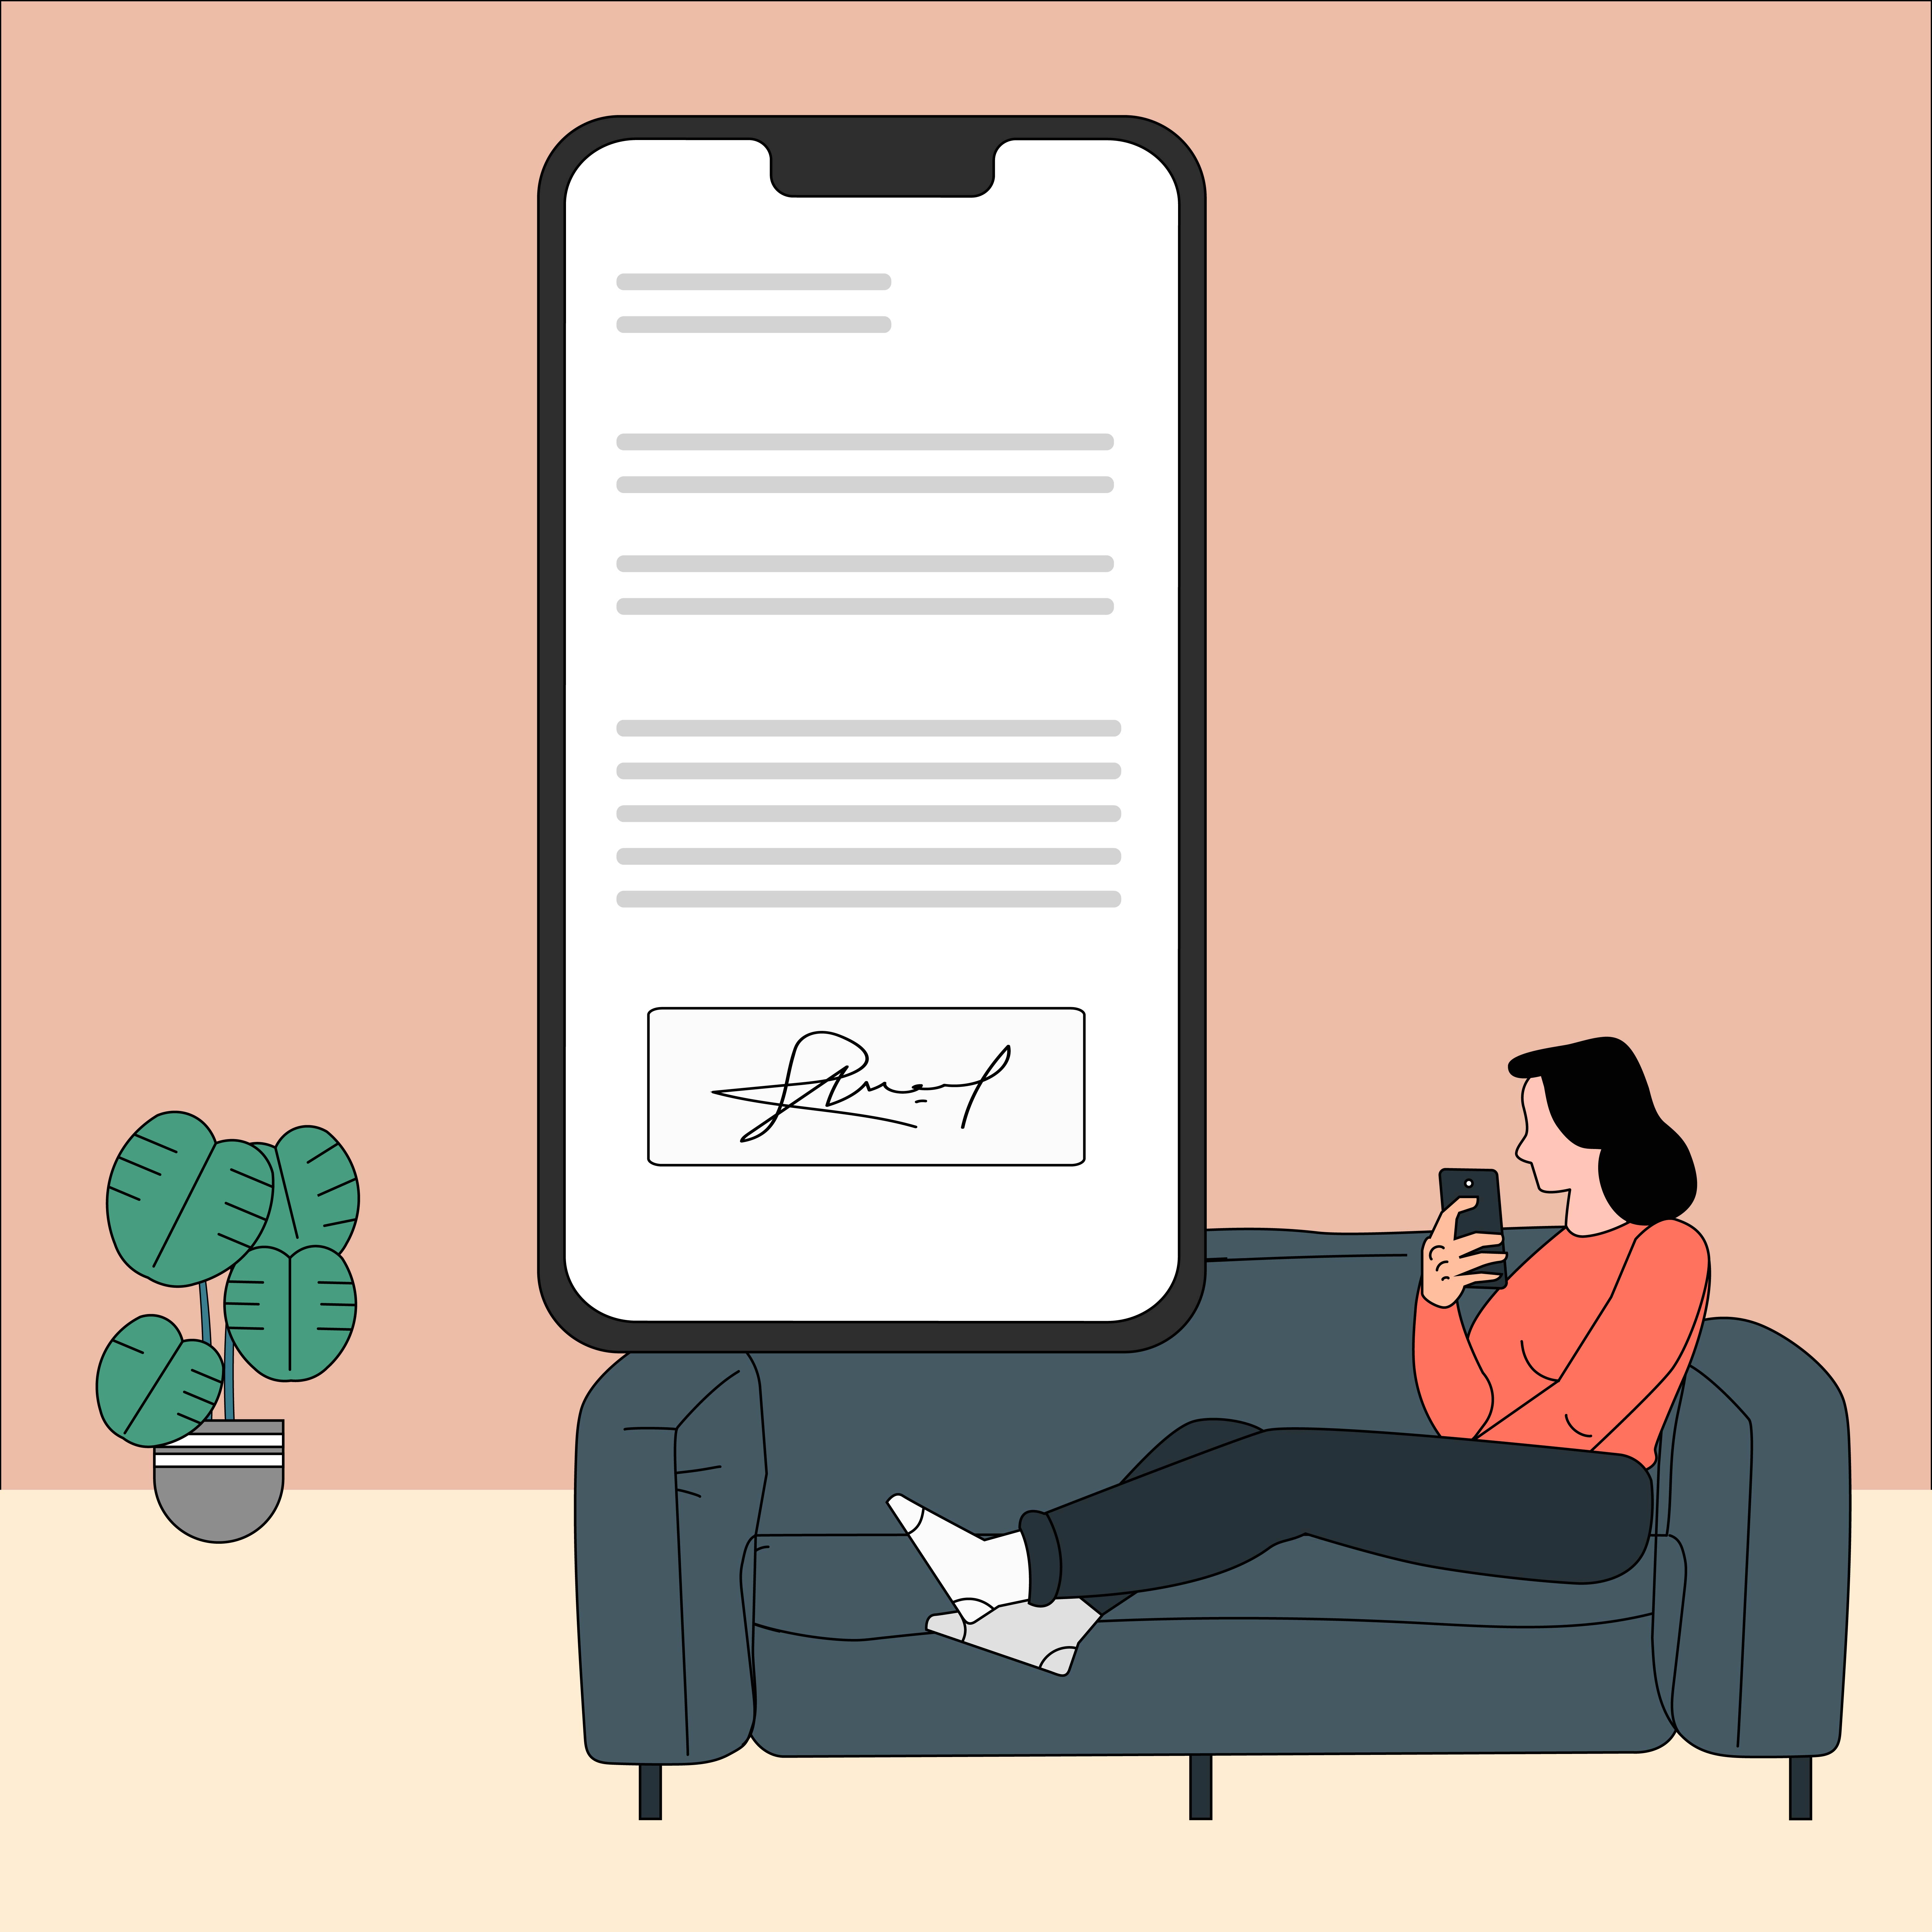 iPhone and Android phone users can quickly request or add electronic signatures from their phones; without relying on an in-person signing.